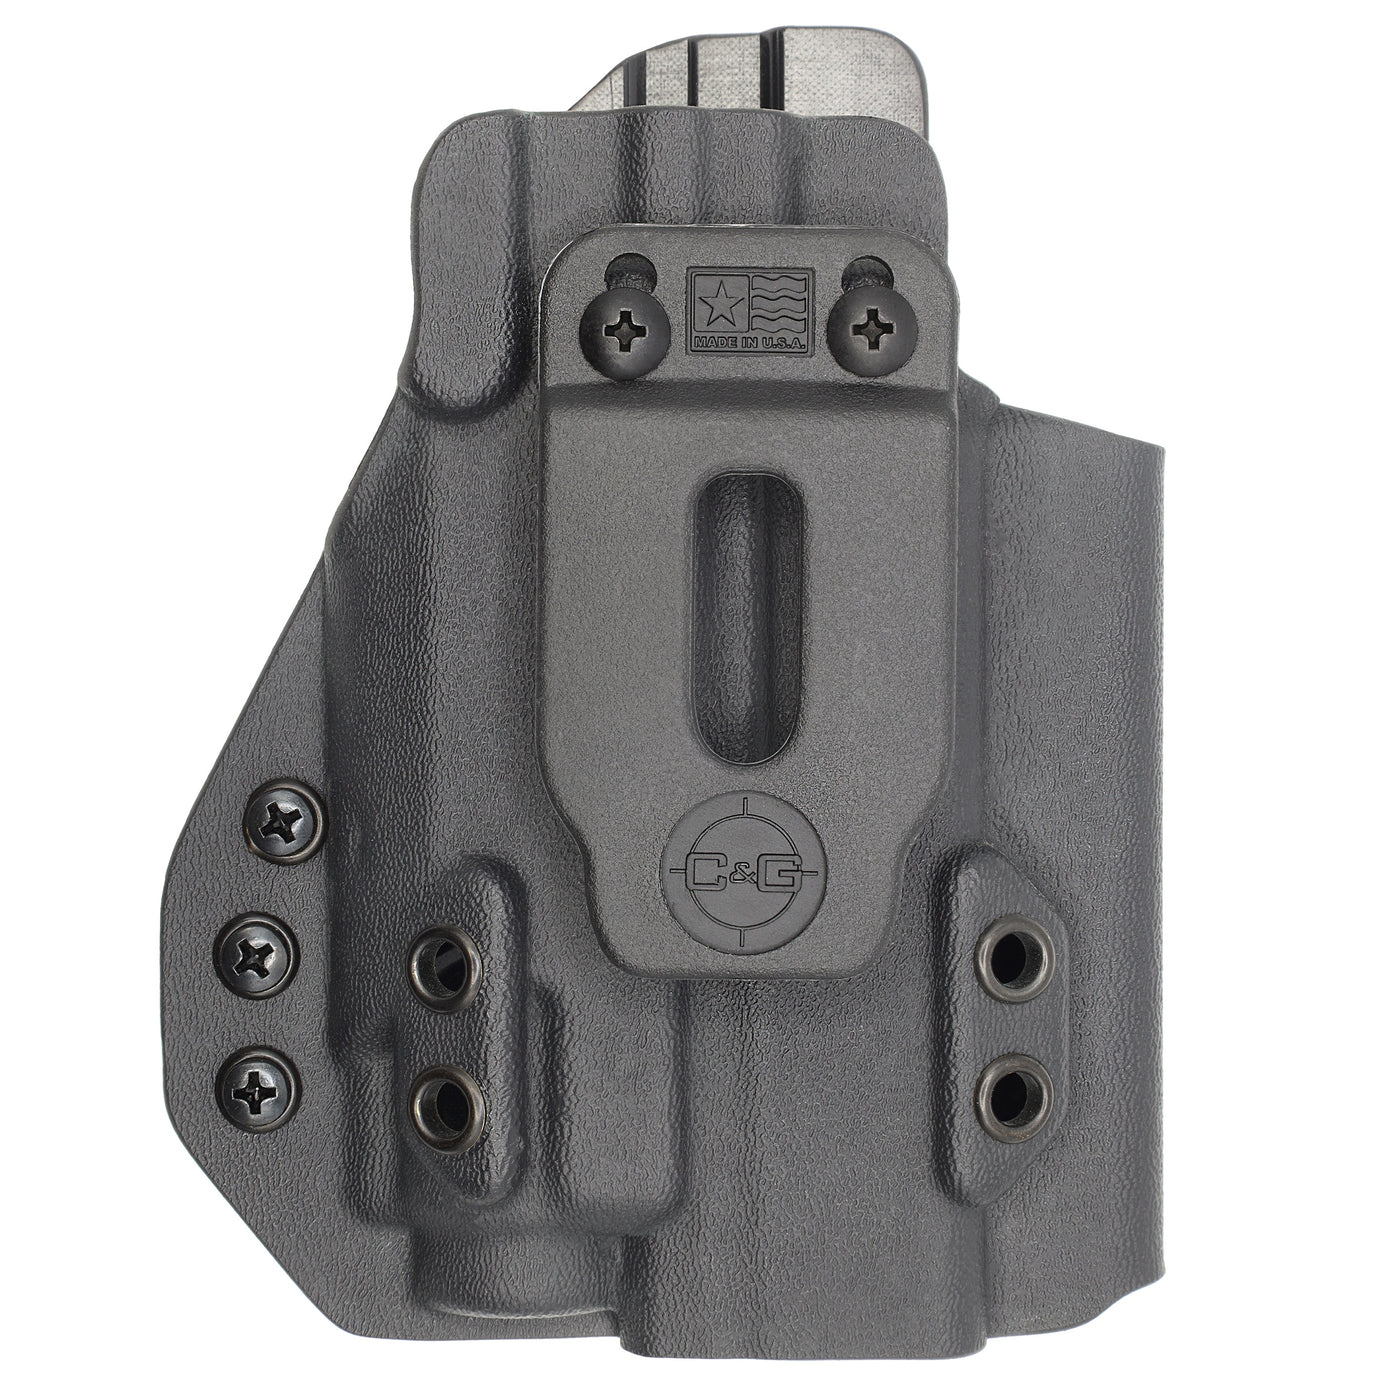 C&G Holsters quickship IWB Tactical CZ P10/c streamlight TLR8